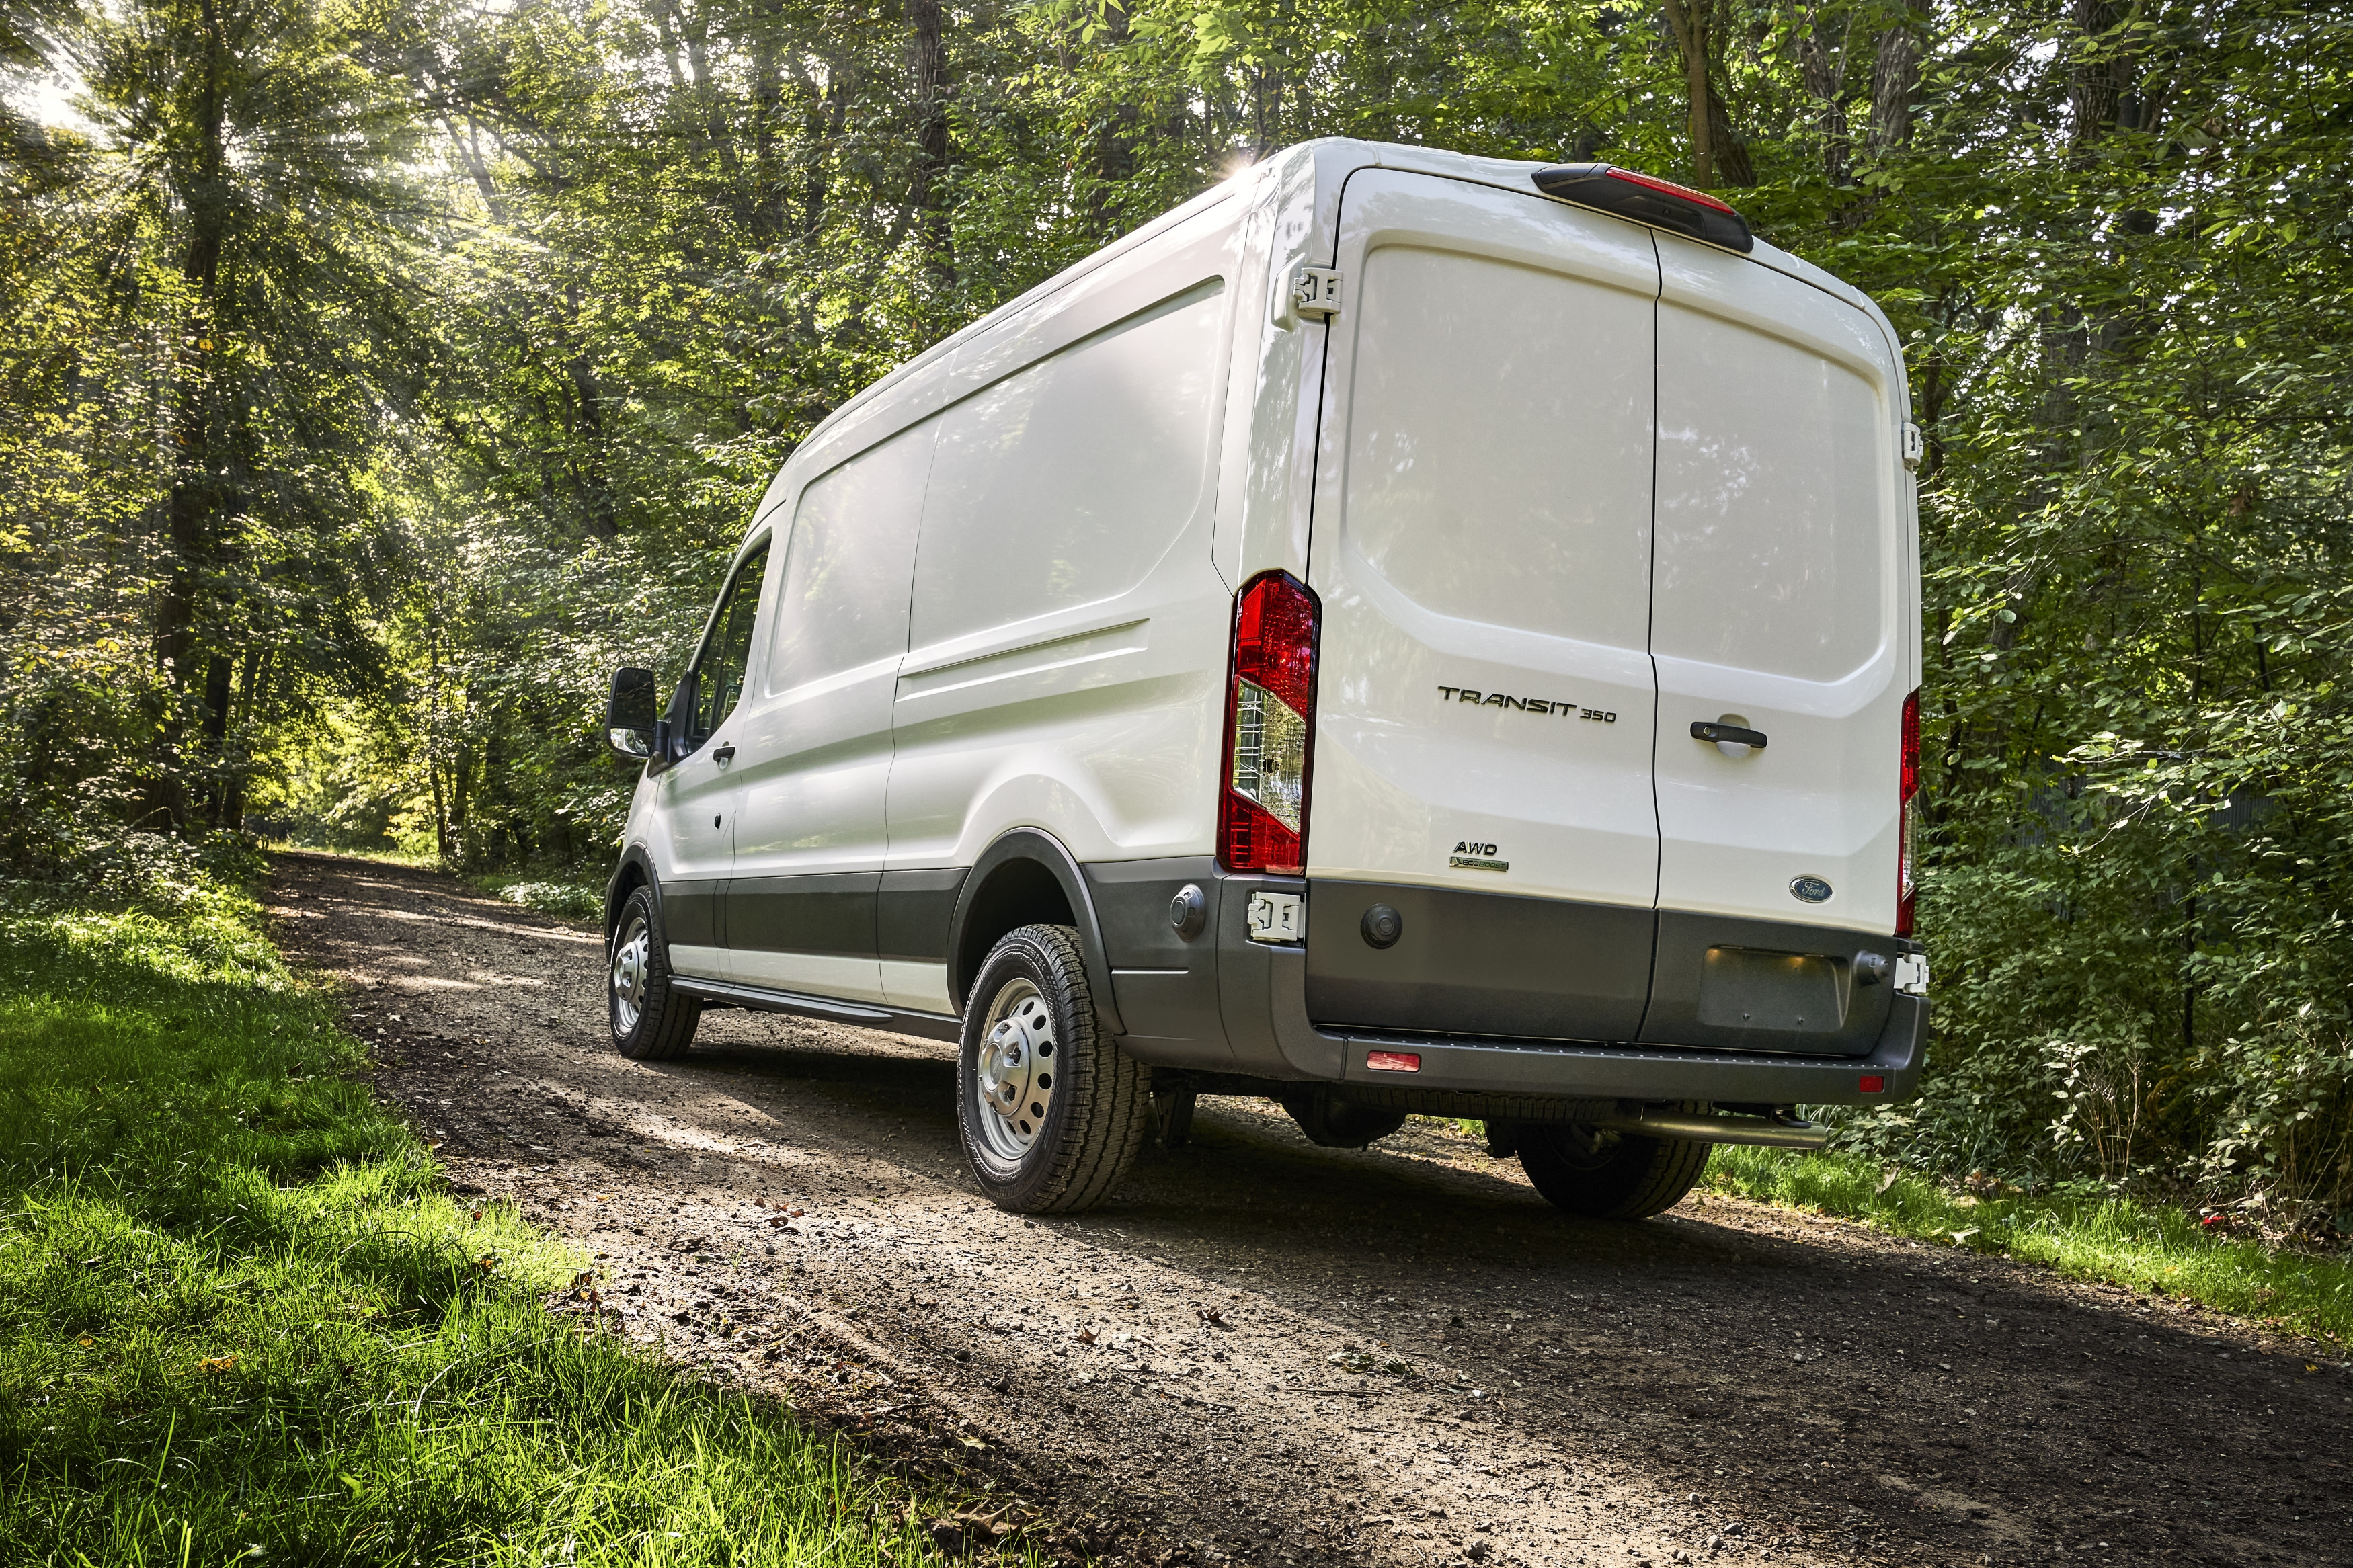 Ford Enhances Recreation and Package Delivery Options for Transit Van